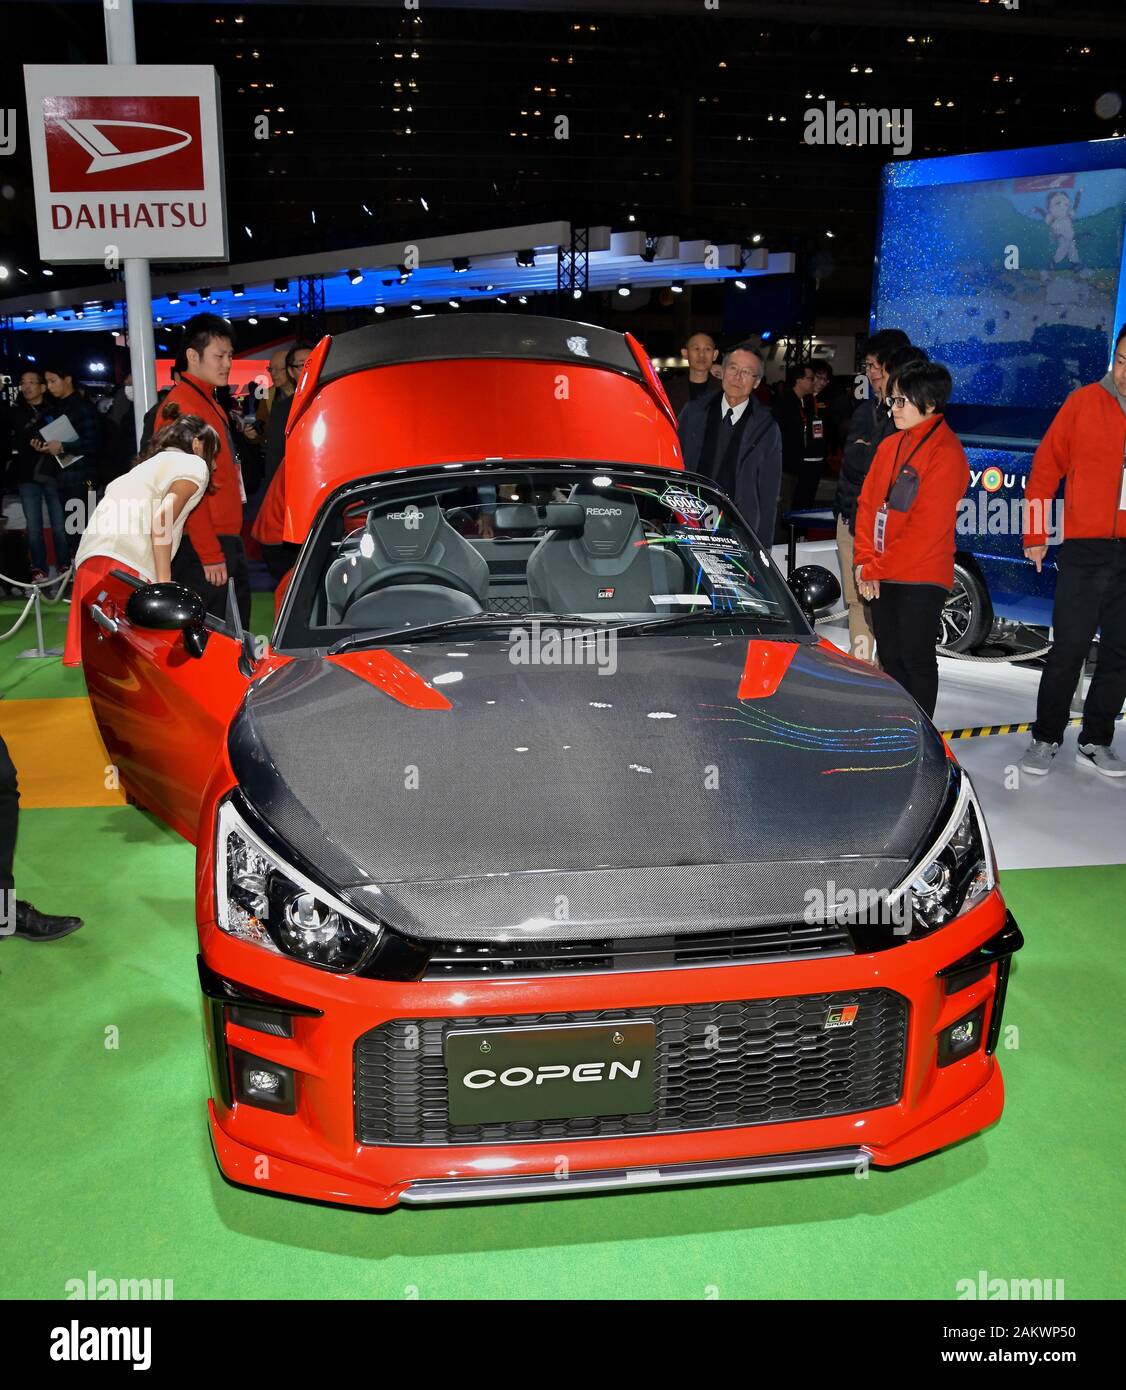 Chiba, Japan. 10th Jan, 2020. Daihatsu Copen GR sports is seen displayed the Tokyo Auto salon 2020 at Makuhari messe in Chiba-Prefecture, Japan on Friday, January 10, 2020. About 438 automakers and auto parts makers appeal their latest products at a three-day custom cars and racing cars exhibition in this event. Photo by Keizo Mori/UPI Credit: UPI/Alamy Live News Stock Photo